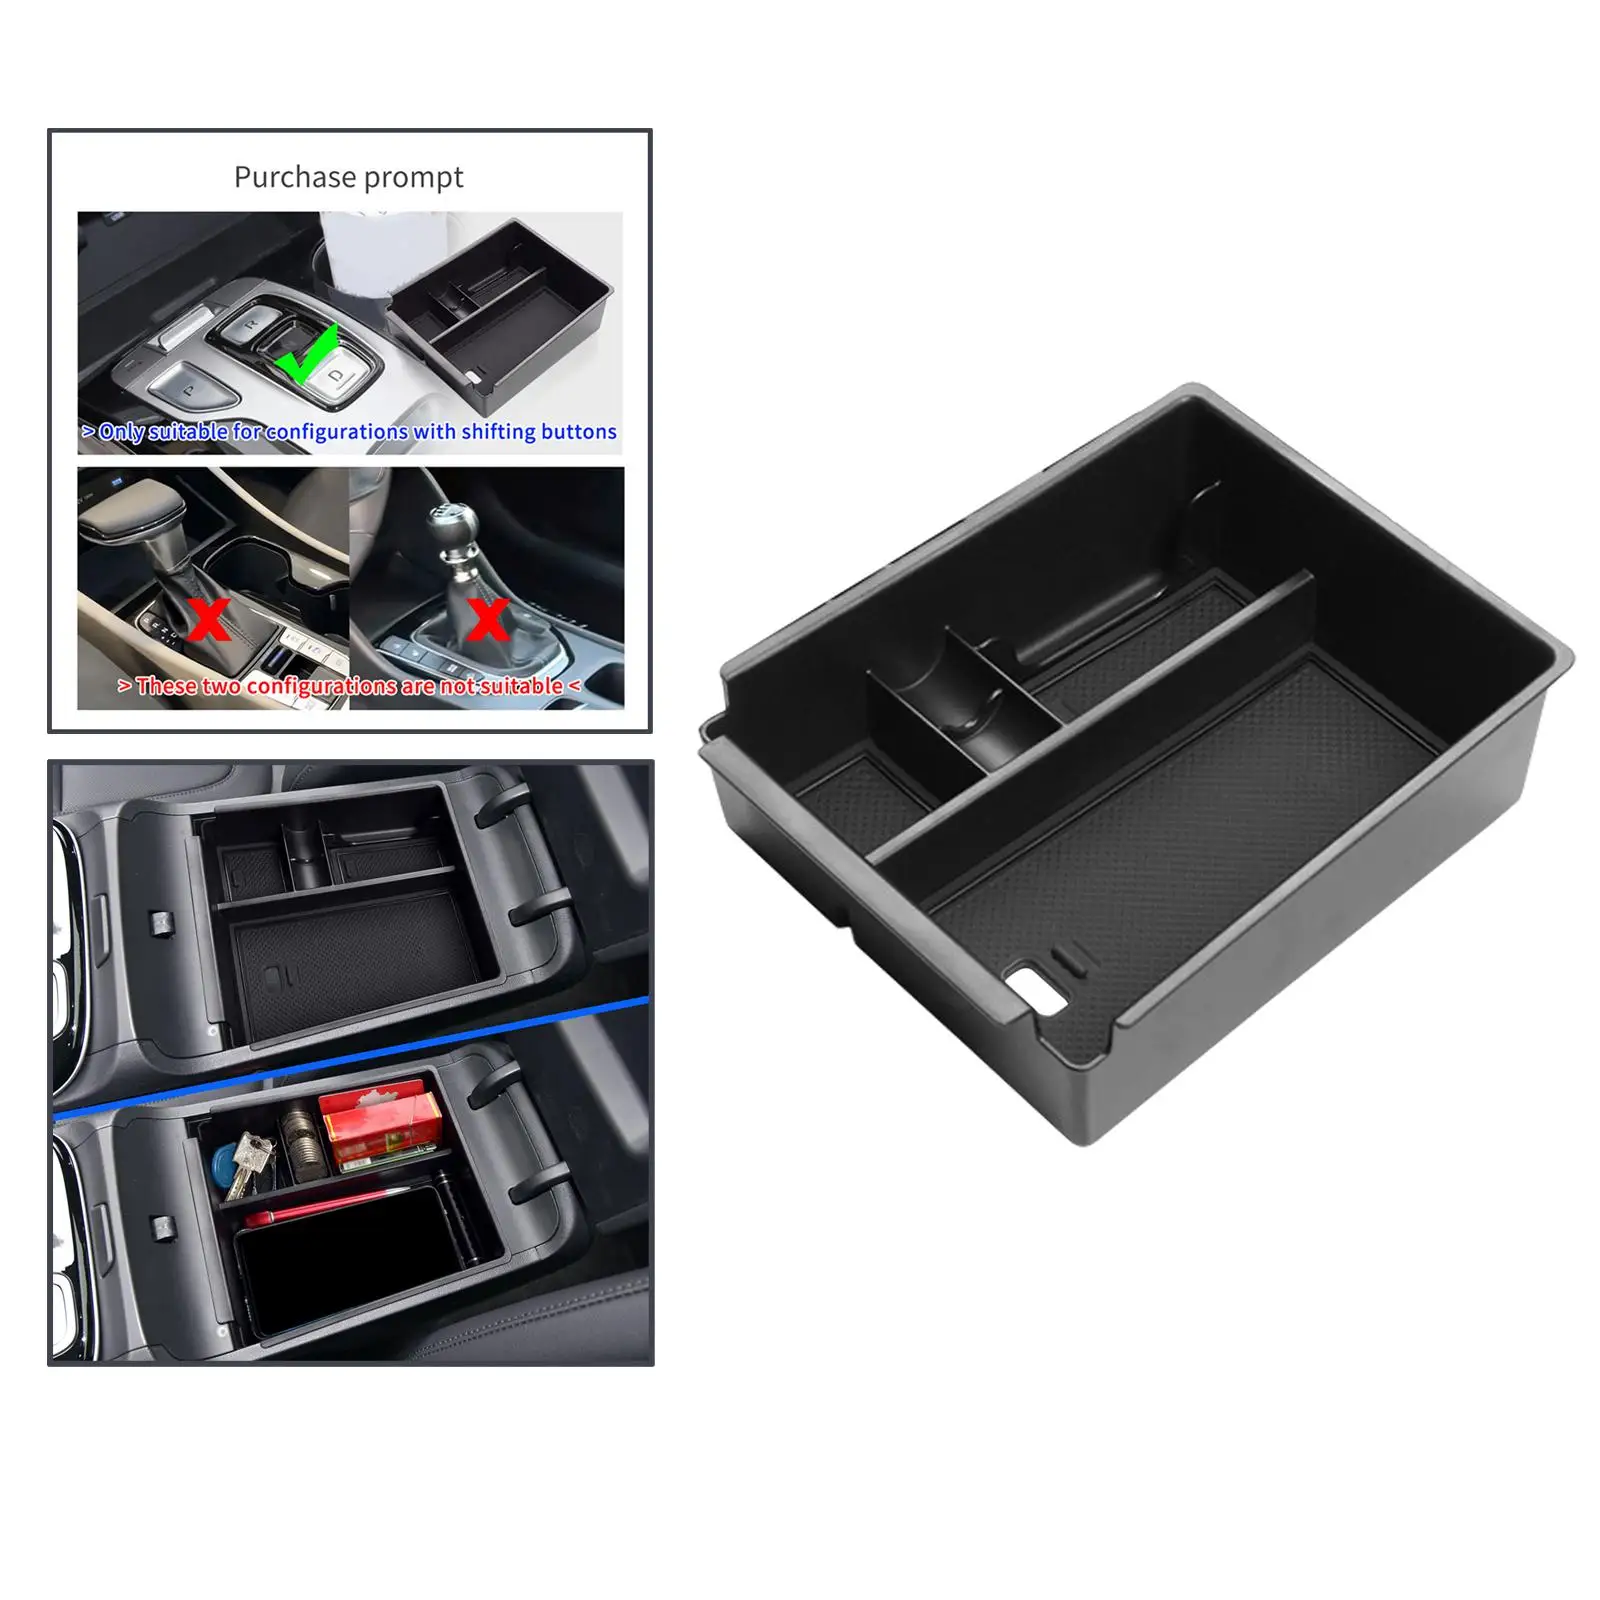 Car Center Console Btorage Box Collection of Documents Coin Glasses Armrest Storage Box Holder Tray Fit for Hyundai Tucson NX4